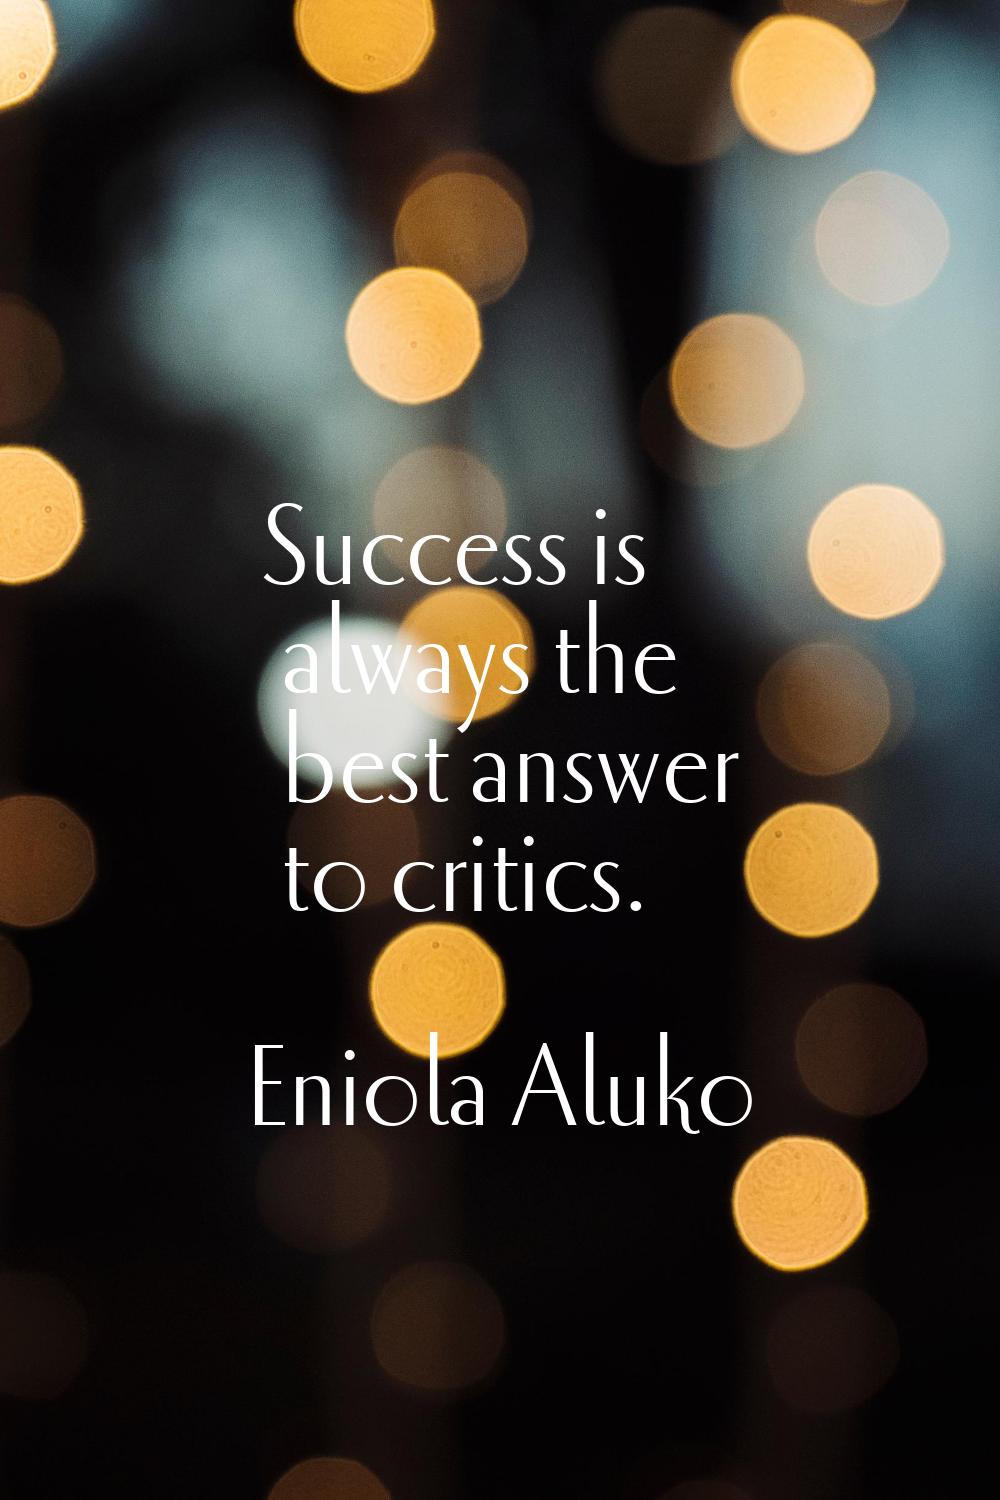 Success is always the best answer to critics.